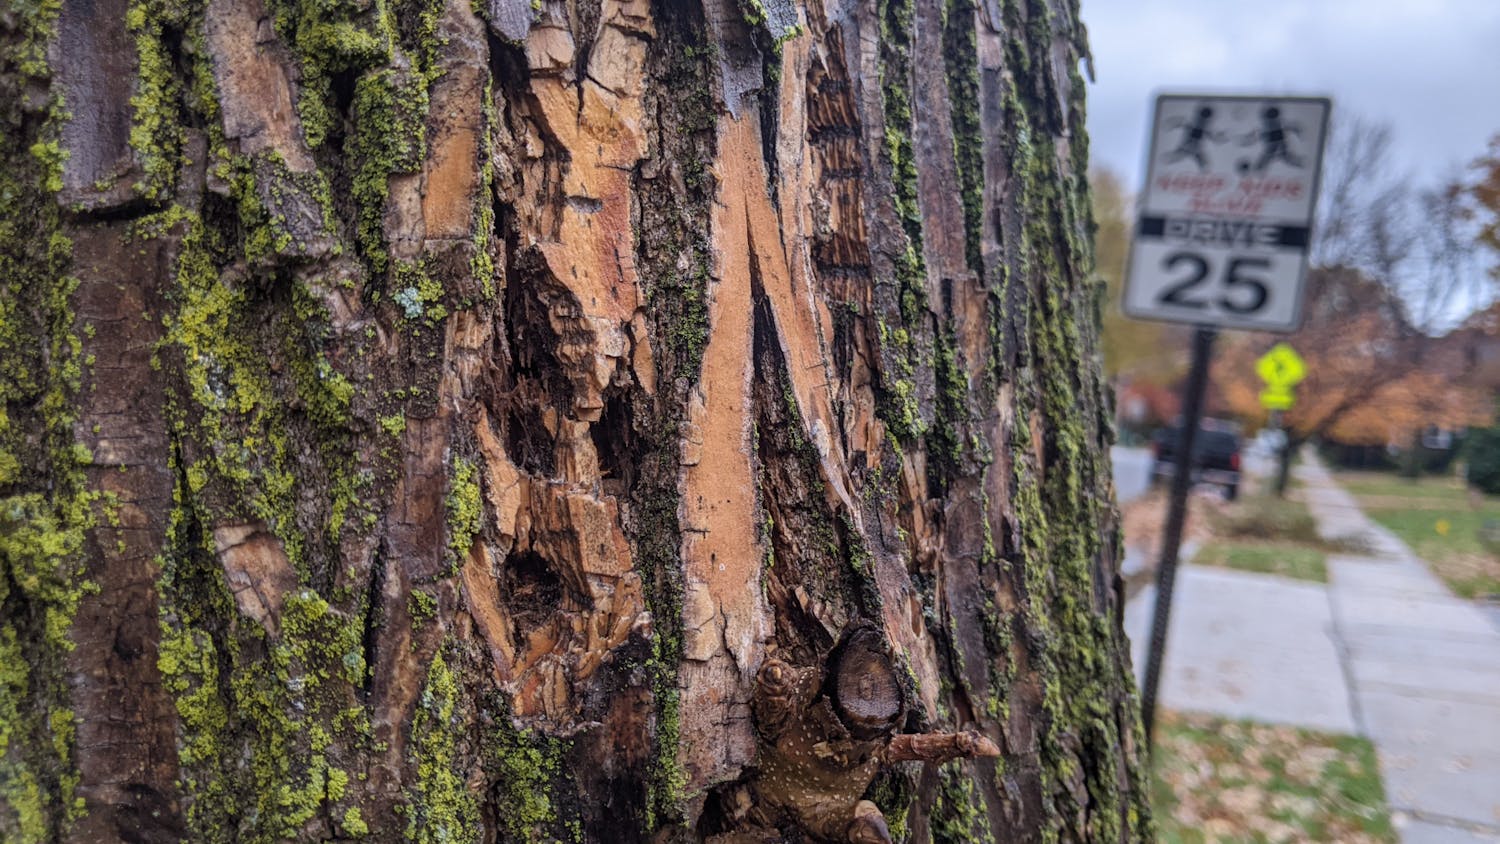 Apparent boreholes in an ash tree in South Orange. (Daniel O'Connor | The Setonian)